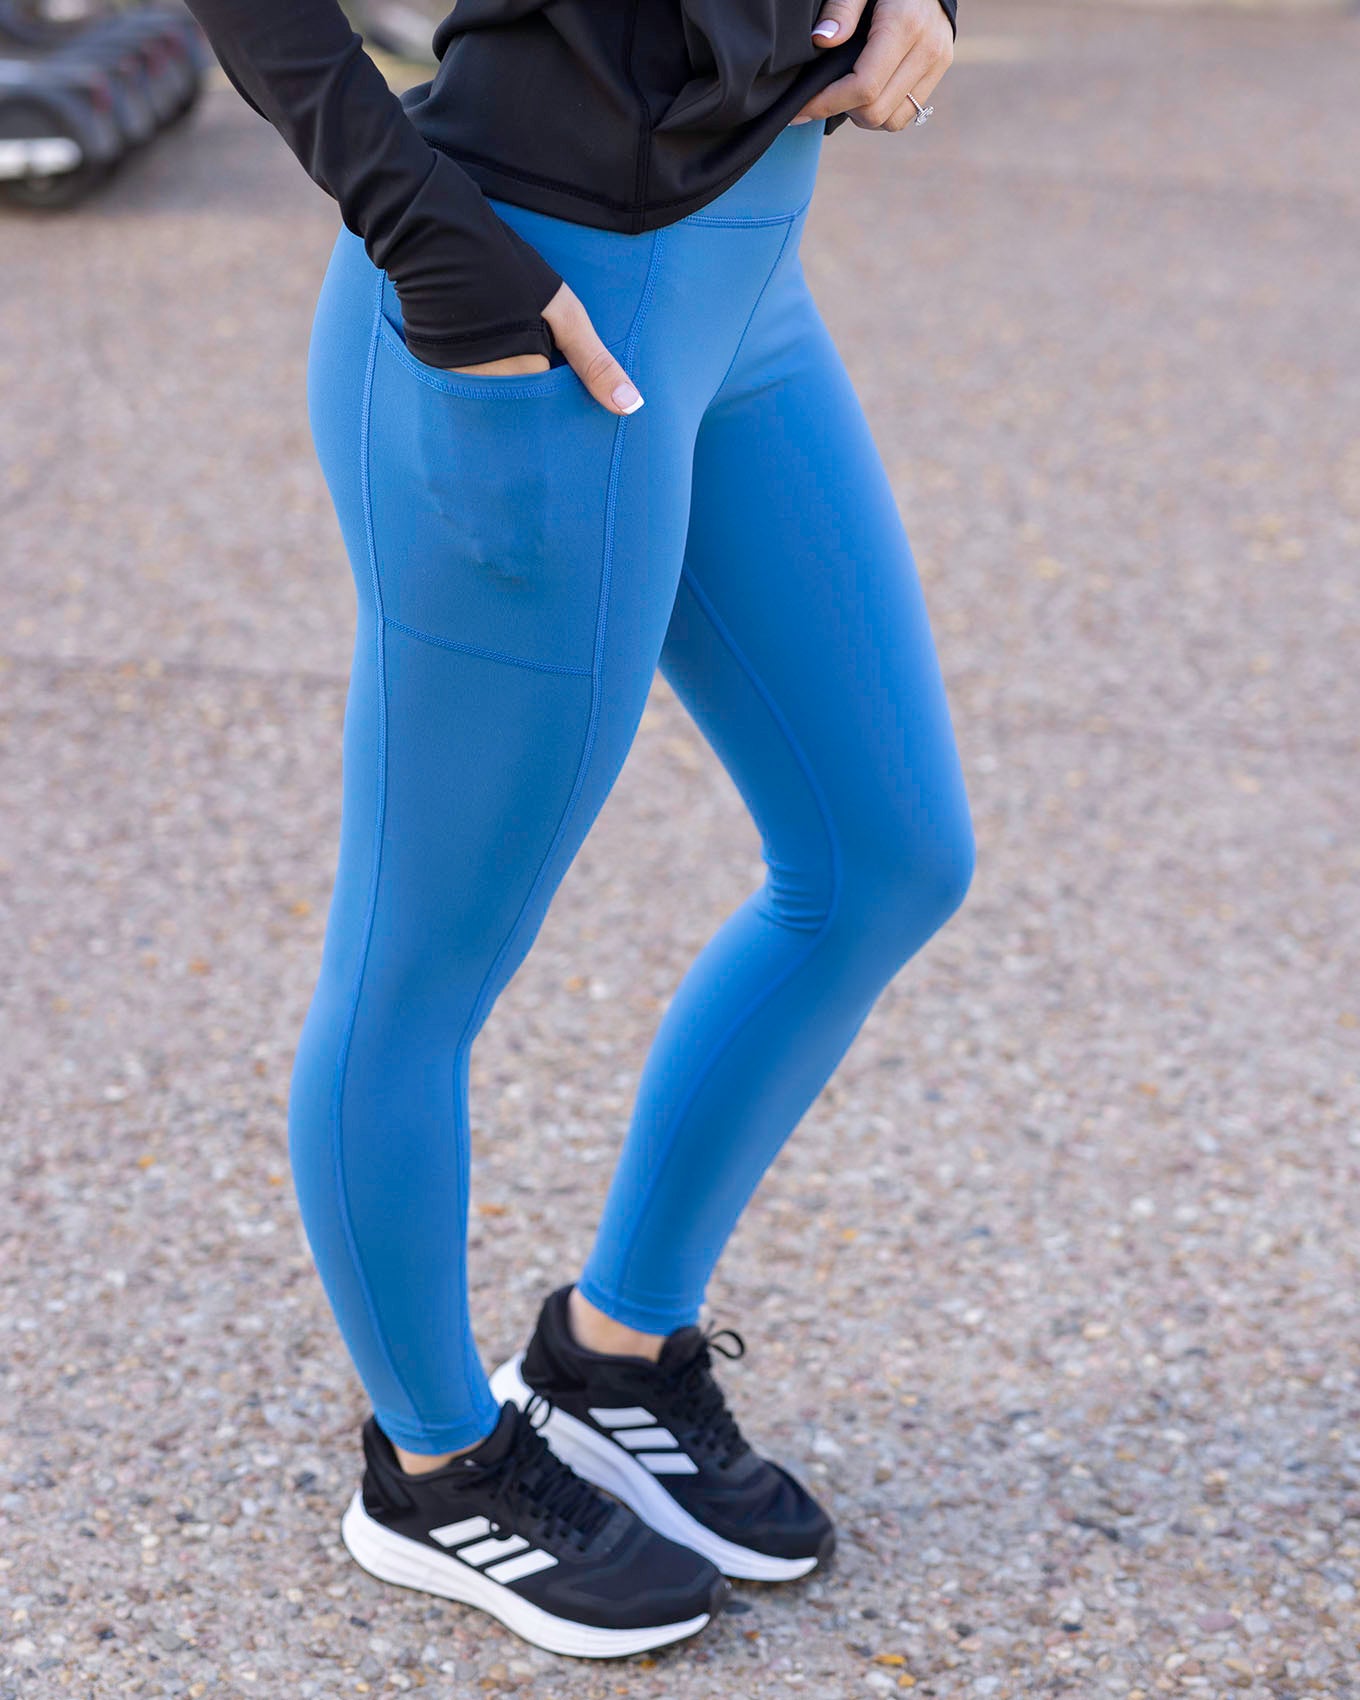 Best Squat Proof Leggings in Pacific Blue - Grace and Lace